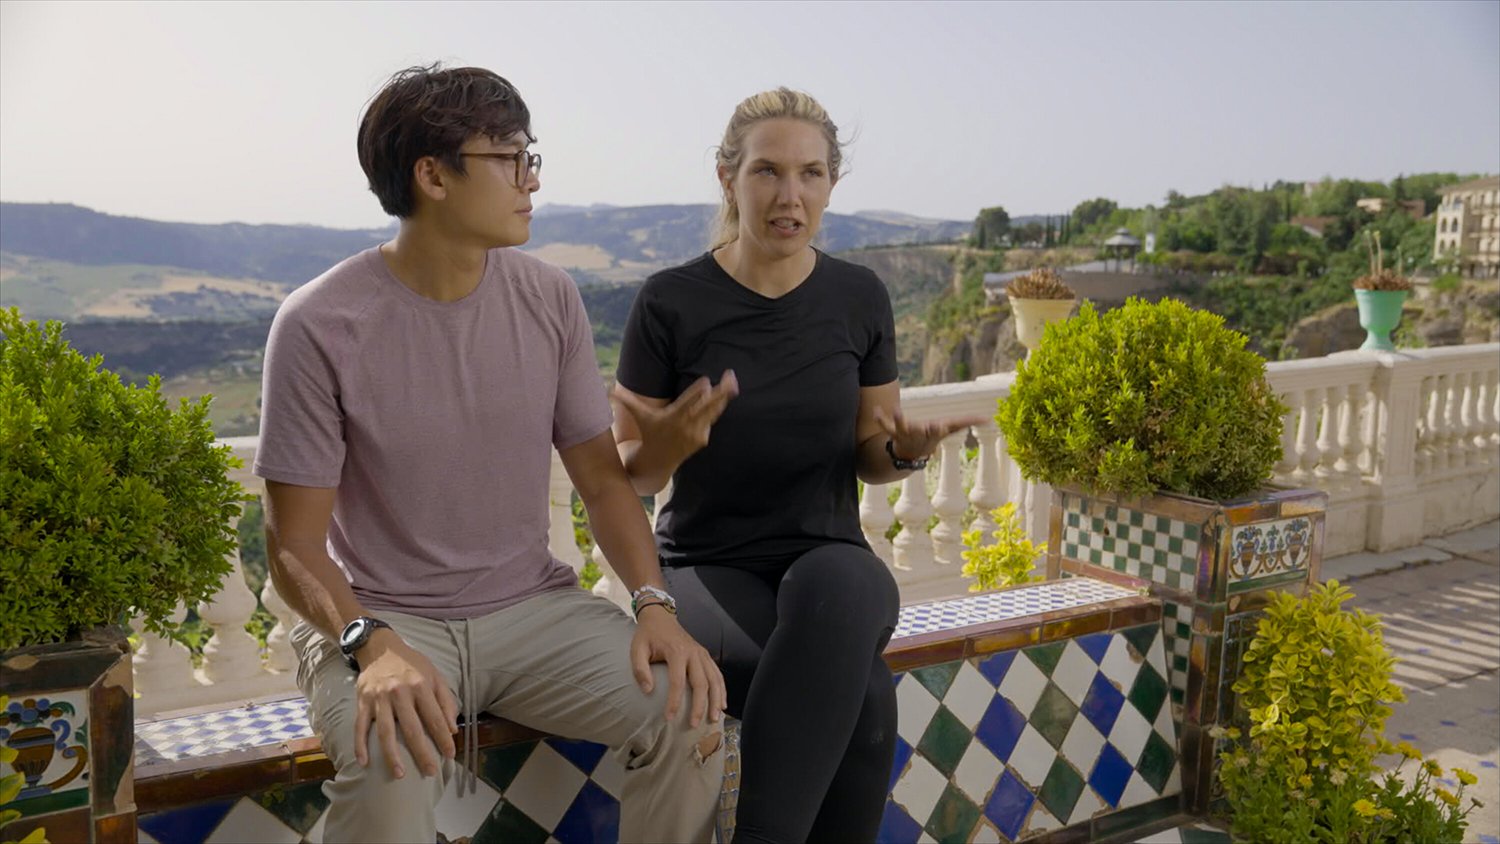 The Amazing Race 34: Derek Xiao sits on a ledge in a purple T-shirt as he looks at Claire Rehfuss beside him, who wears a black T-shirt and talks with her hands spread out.